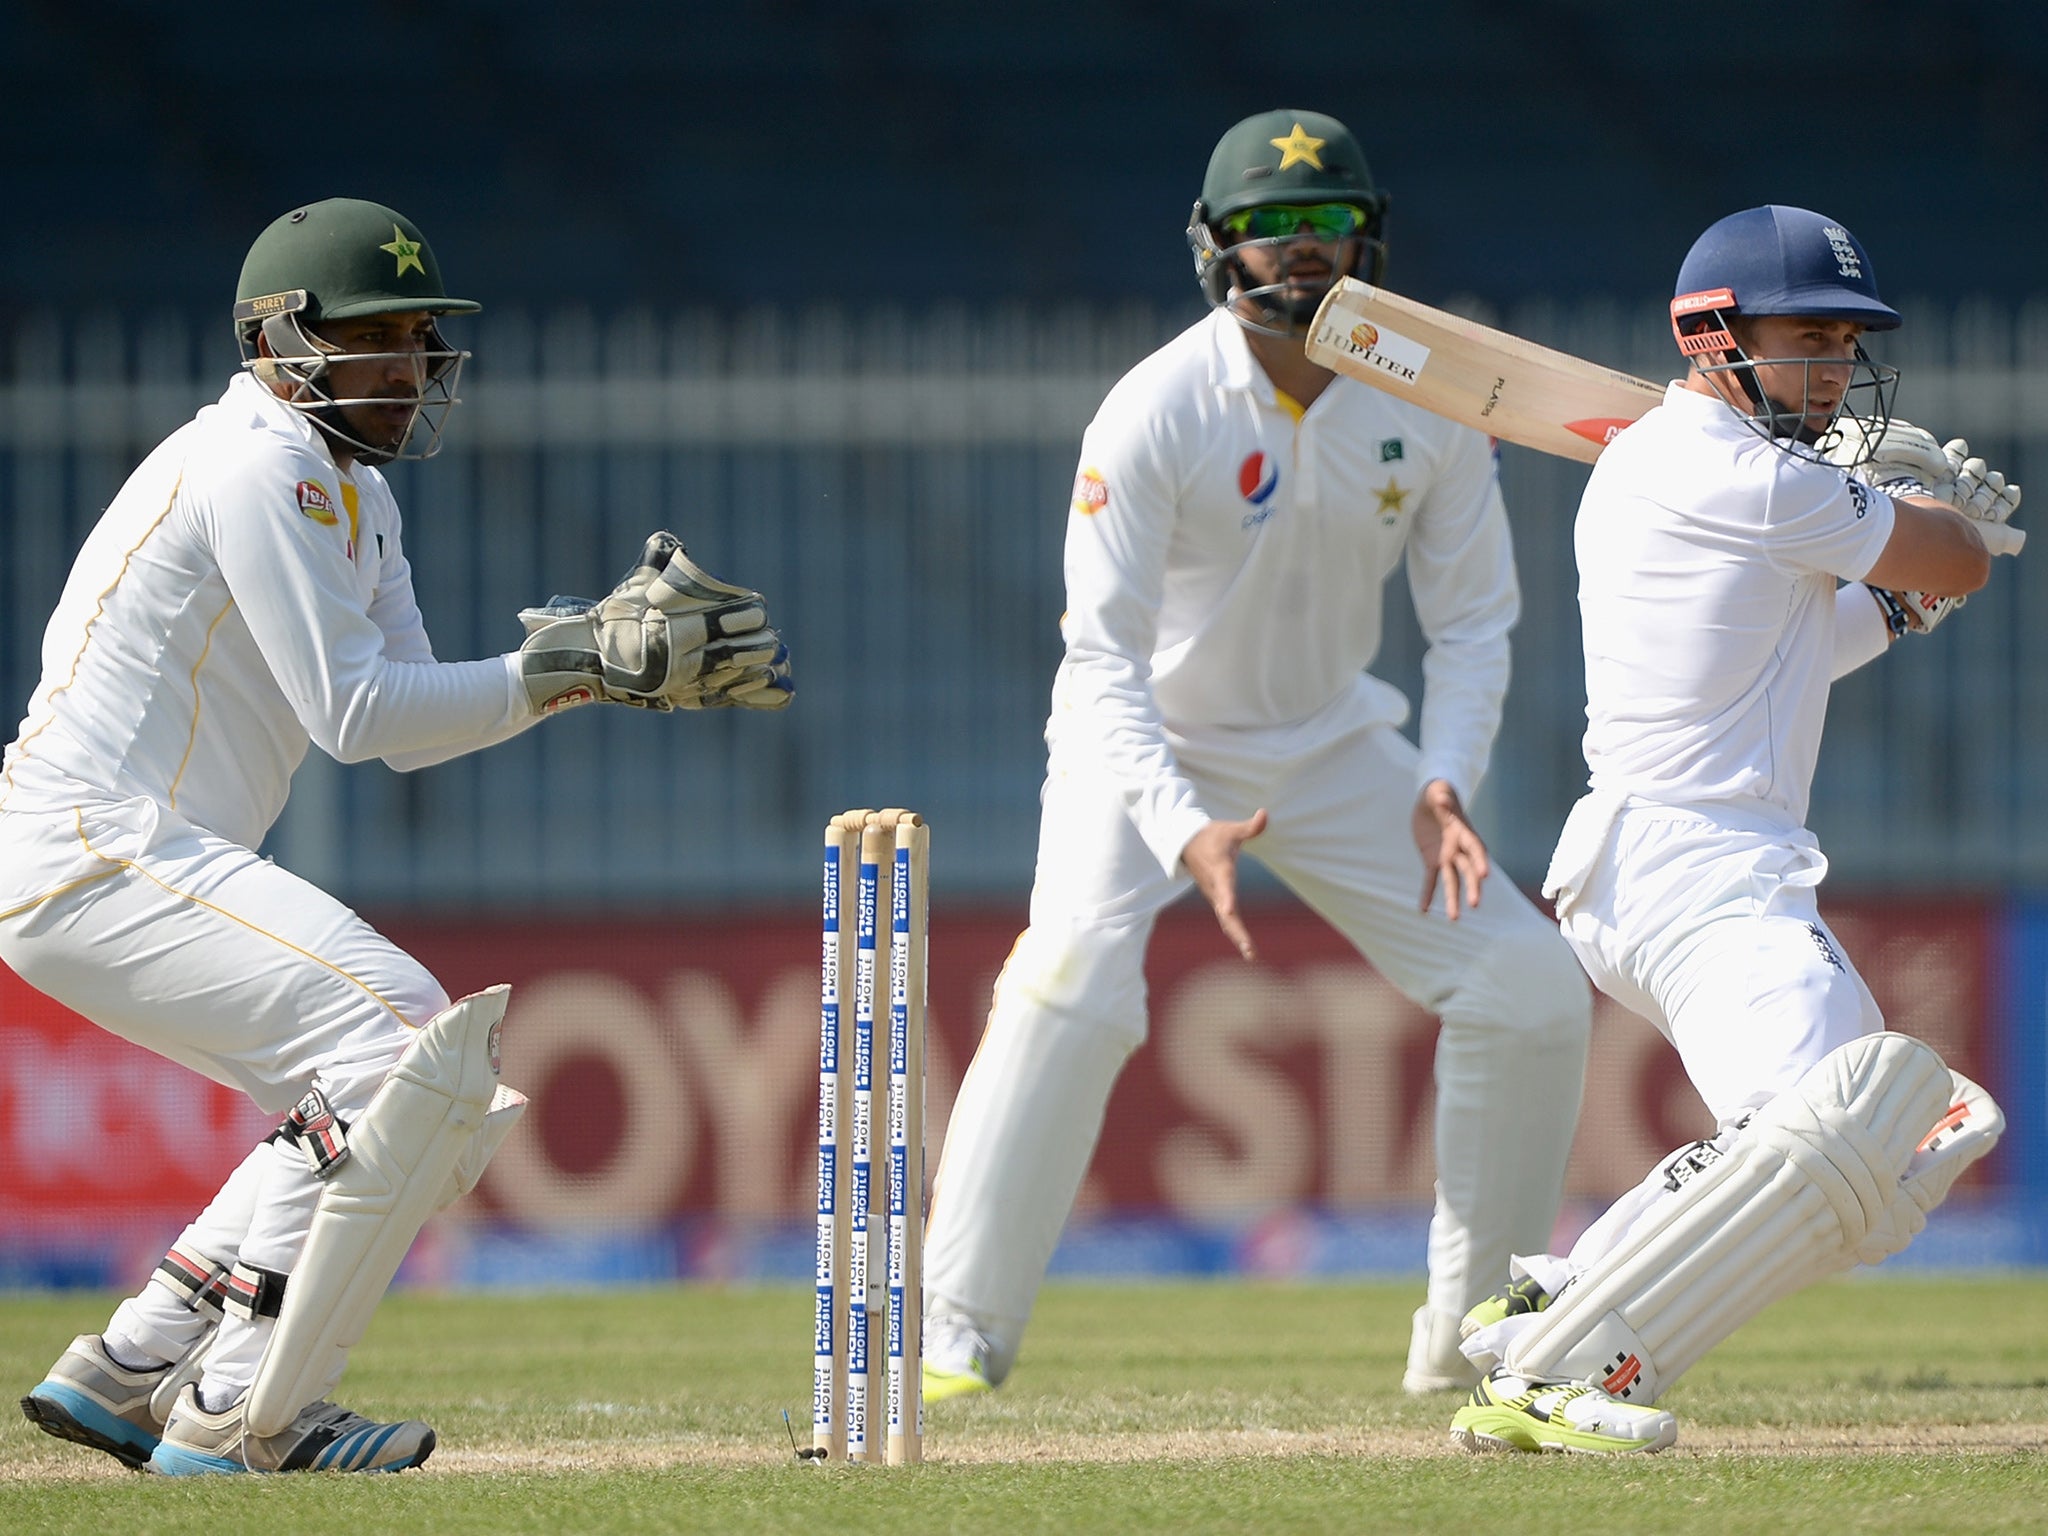 James Taylor (right) plays a shot against Pakistan